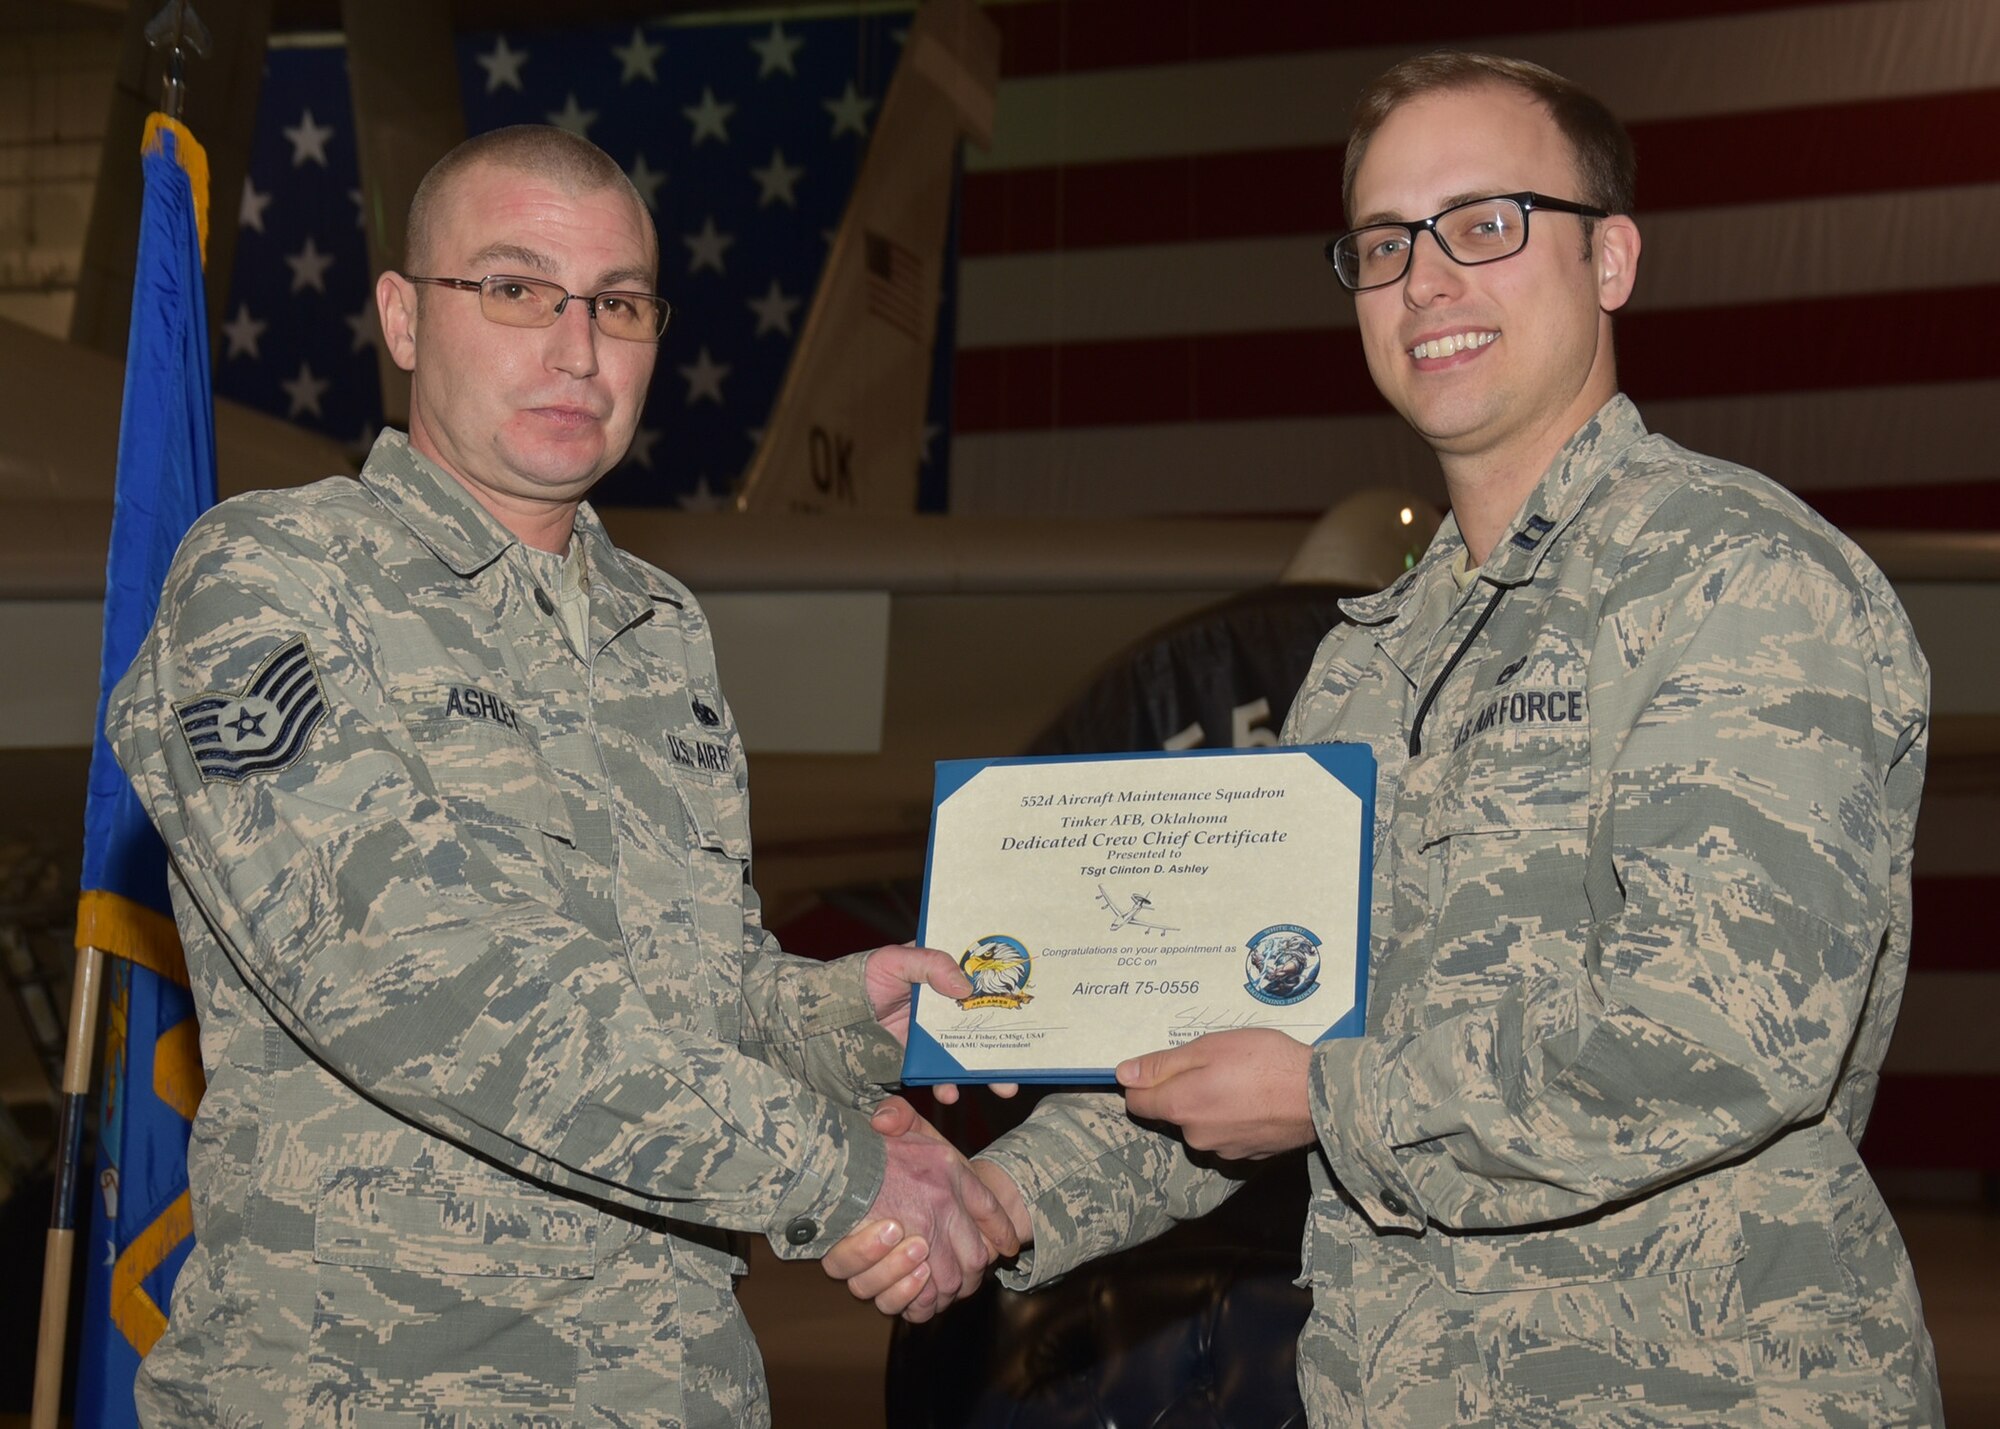 Capt. Shawn Lundskow, 552nd Maintenance Squadron/White Aircraft Maintenance Unit Officer in Charge, presents a dedicated crew chief certificate to Tech. Sgt. Clinton Ashley, 552nd MXS, during an E-3 Sentry aircraft dedication ceremony held Jan. 6, 2020 in Dock 2 of Bldg. 230. This marks the first time that the 966th Airborne Air Control Squadron had an E-3 Sentry aircraft dedicated for use by the squadron and will help forge a bond between aircrews and maintainers.

(Air Force photo/Ron Mullan)